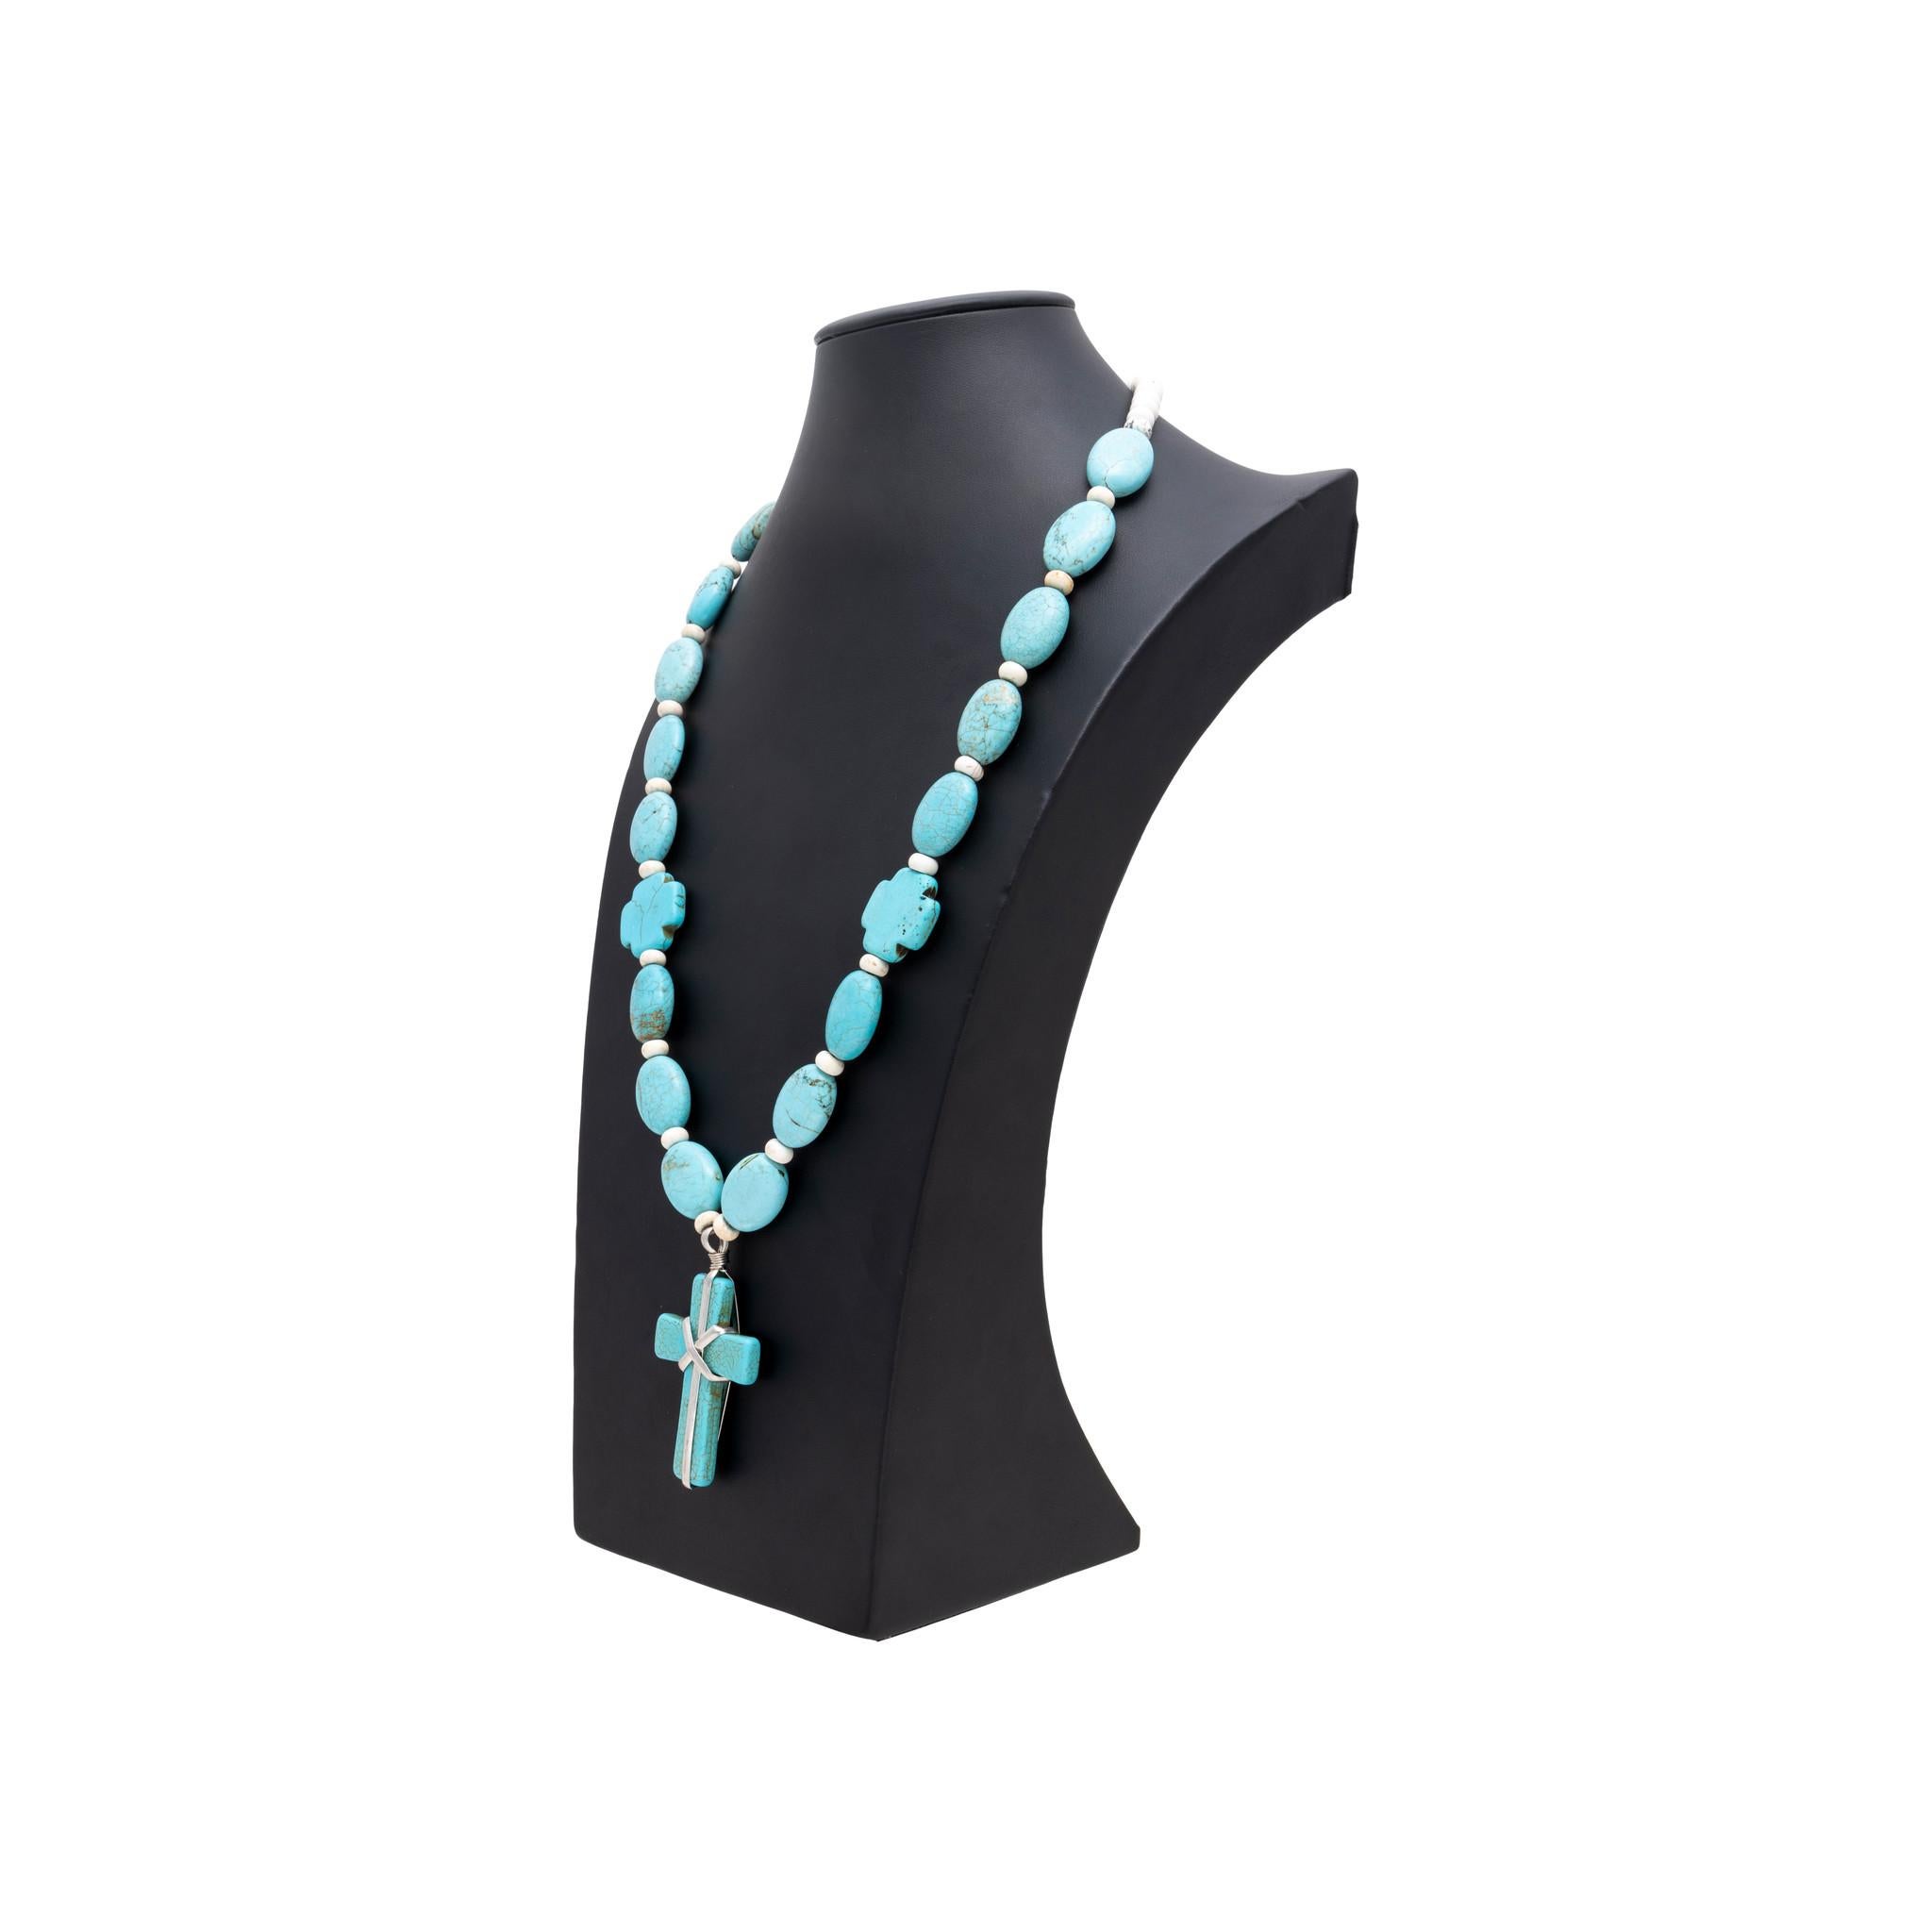 Native American Nacajo Indian turquoise beaded necklace. Featuring one large sterling wrapped cross pendant attached to beaded chain. Beads are also made of turquois and oblong shaped. Each turquoise bead is interspersed with small white beads. Two